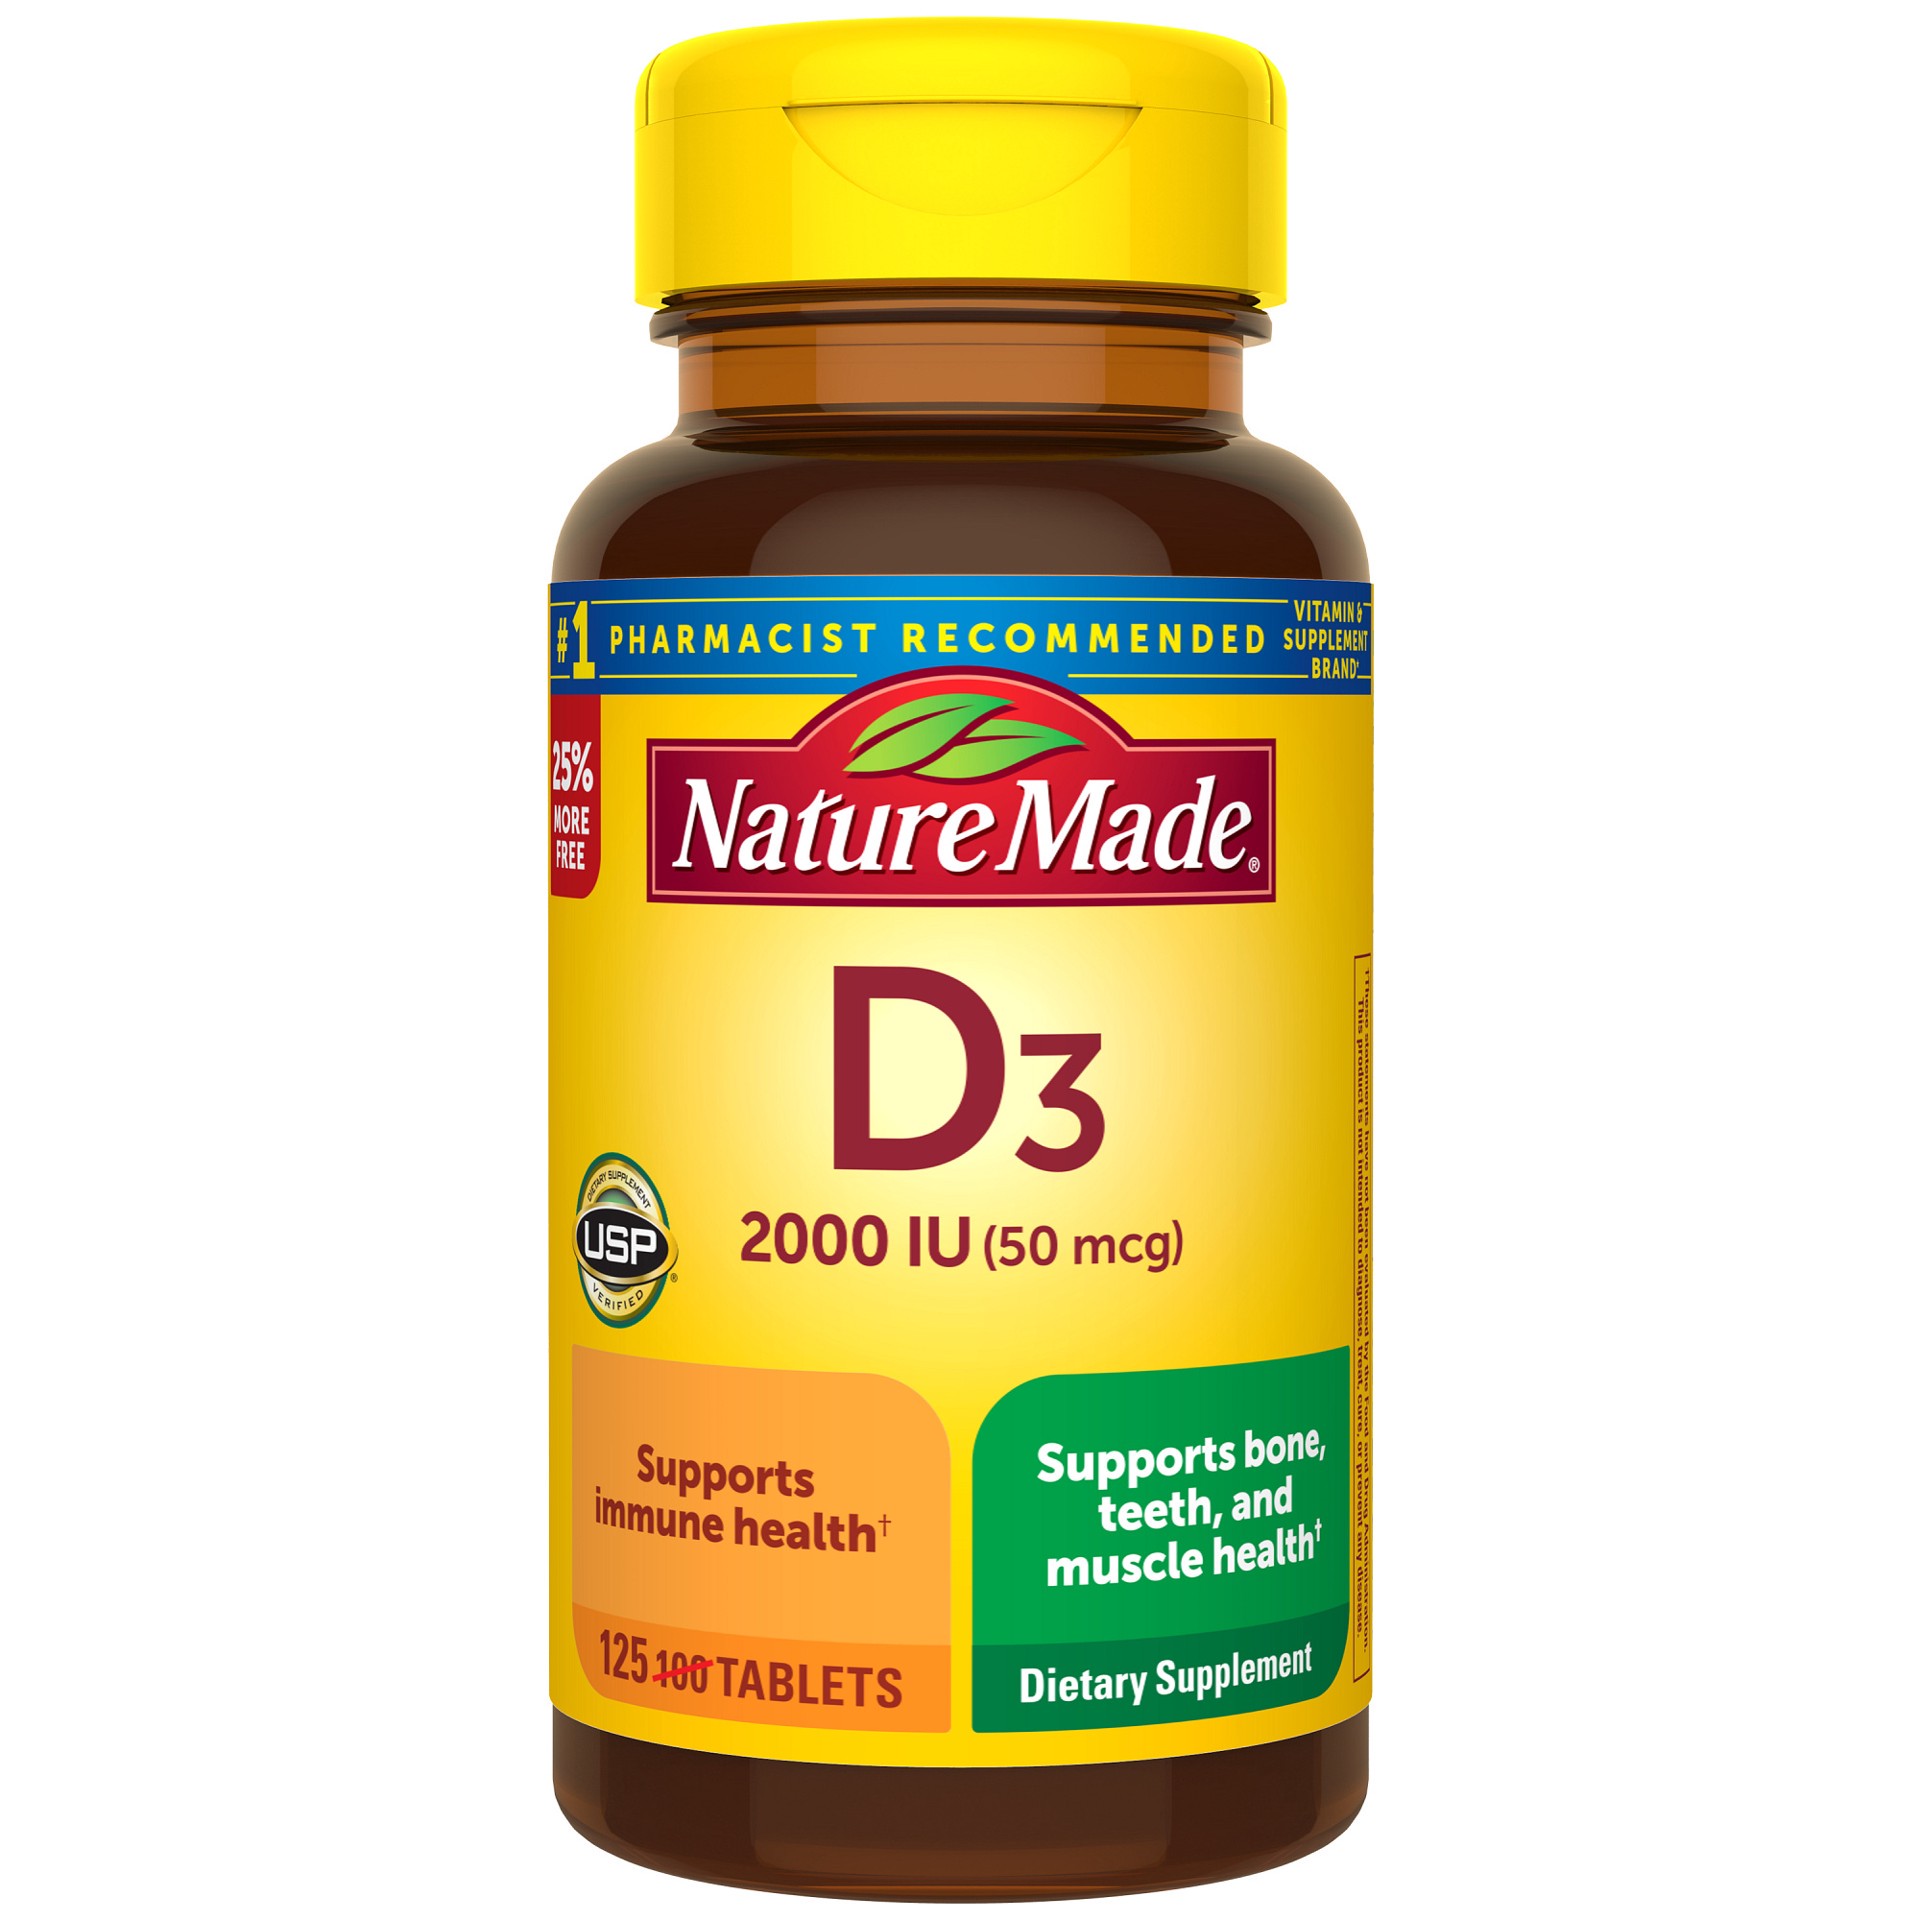 slide 1 of 7, Nature Made Vitamin D3 2000 IU (50 mcg), Dietary Supplement for Bone, Teeth, Muscle and Immune Health Support, 125 Tablets, 125 Day Supply, 125 ct